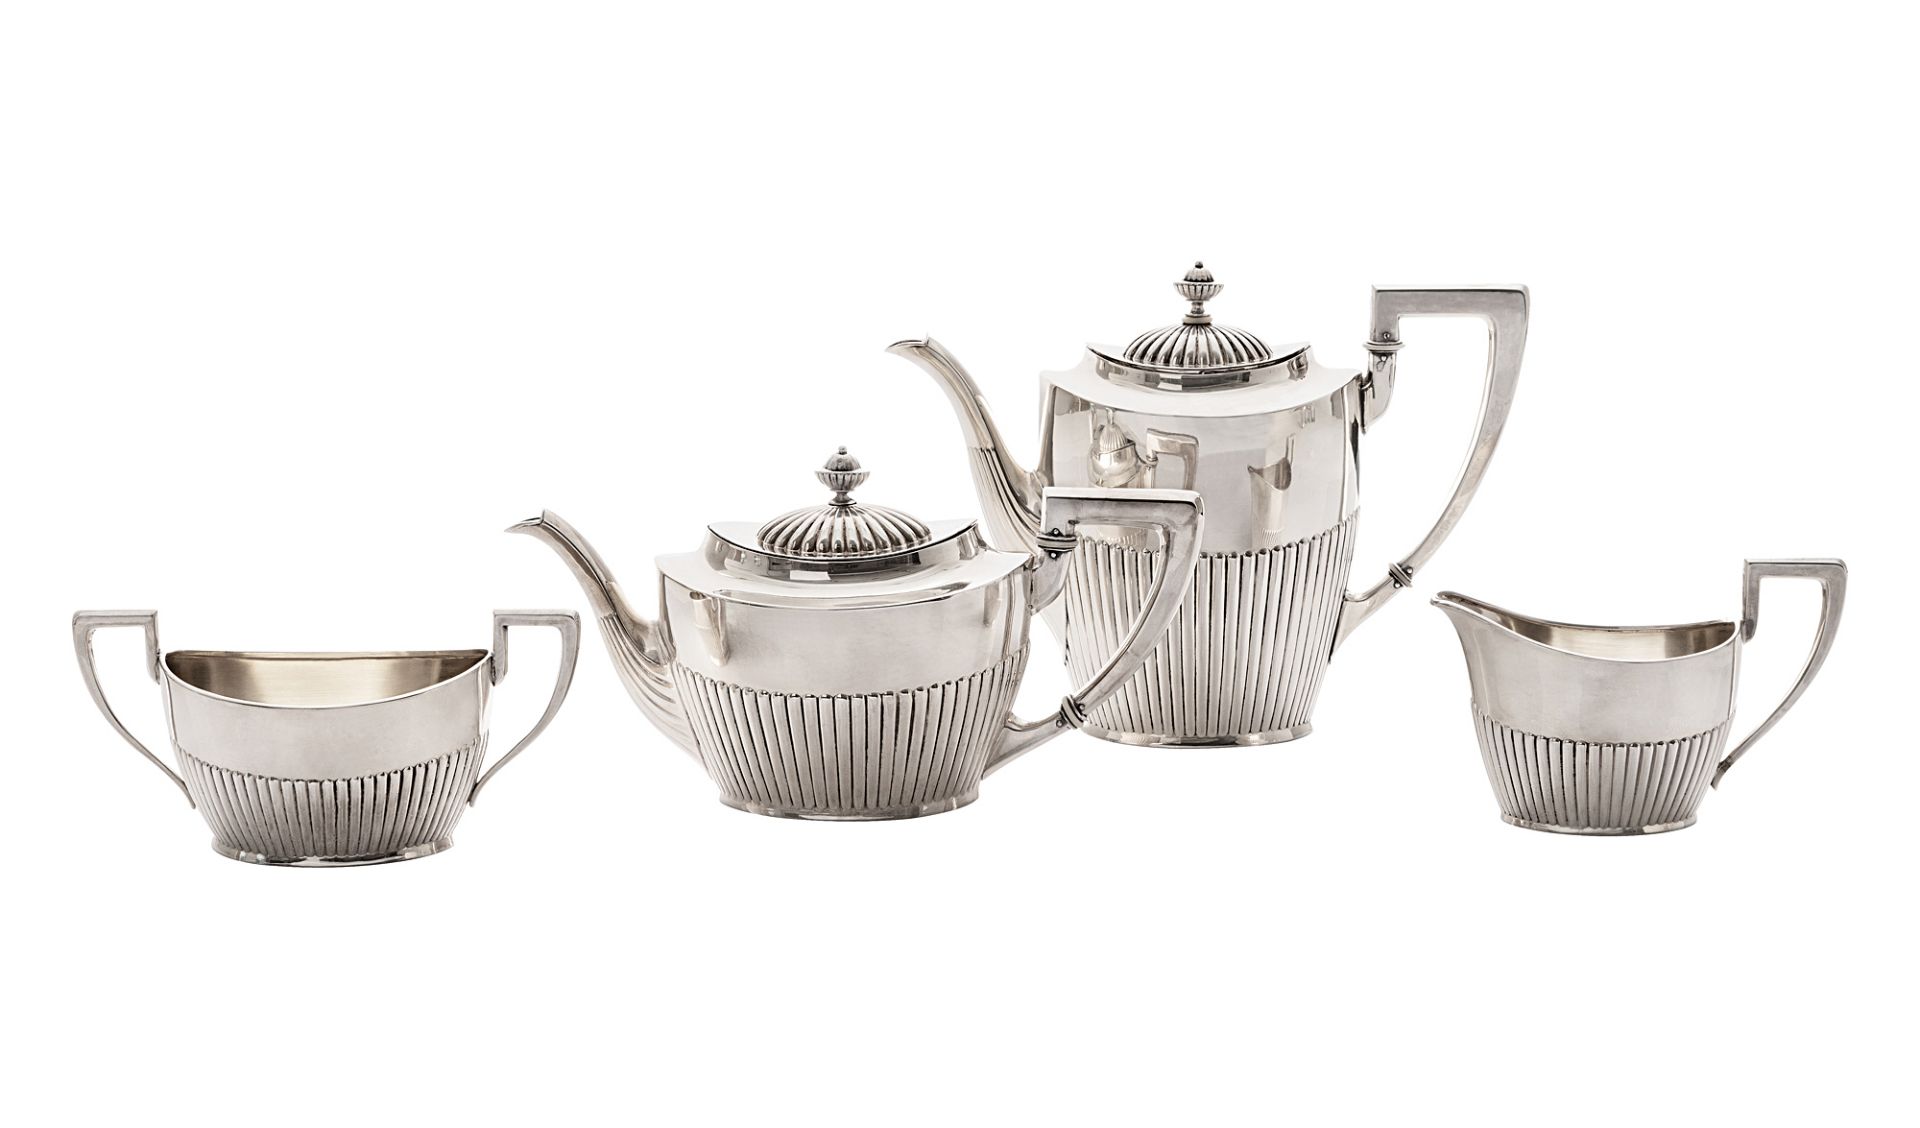 Coffee and tea service in Empire style